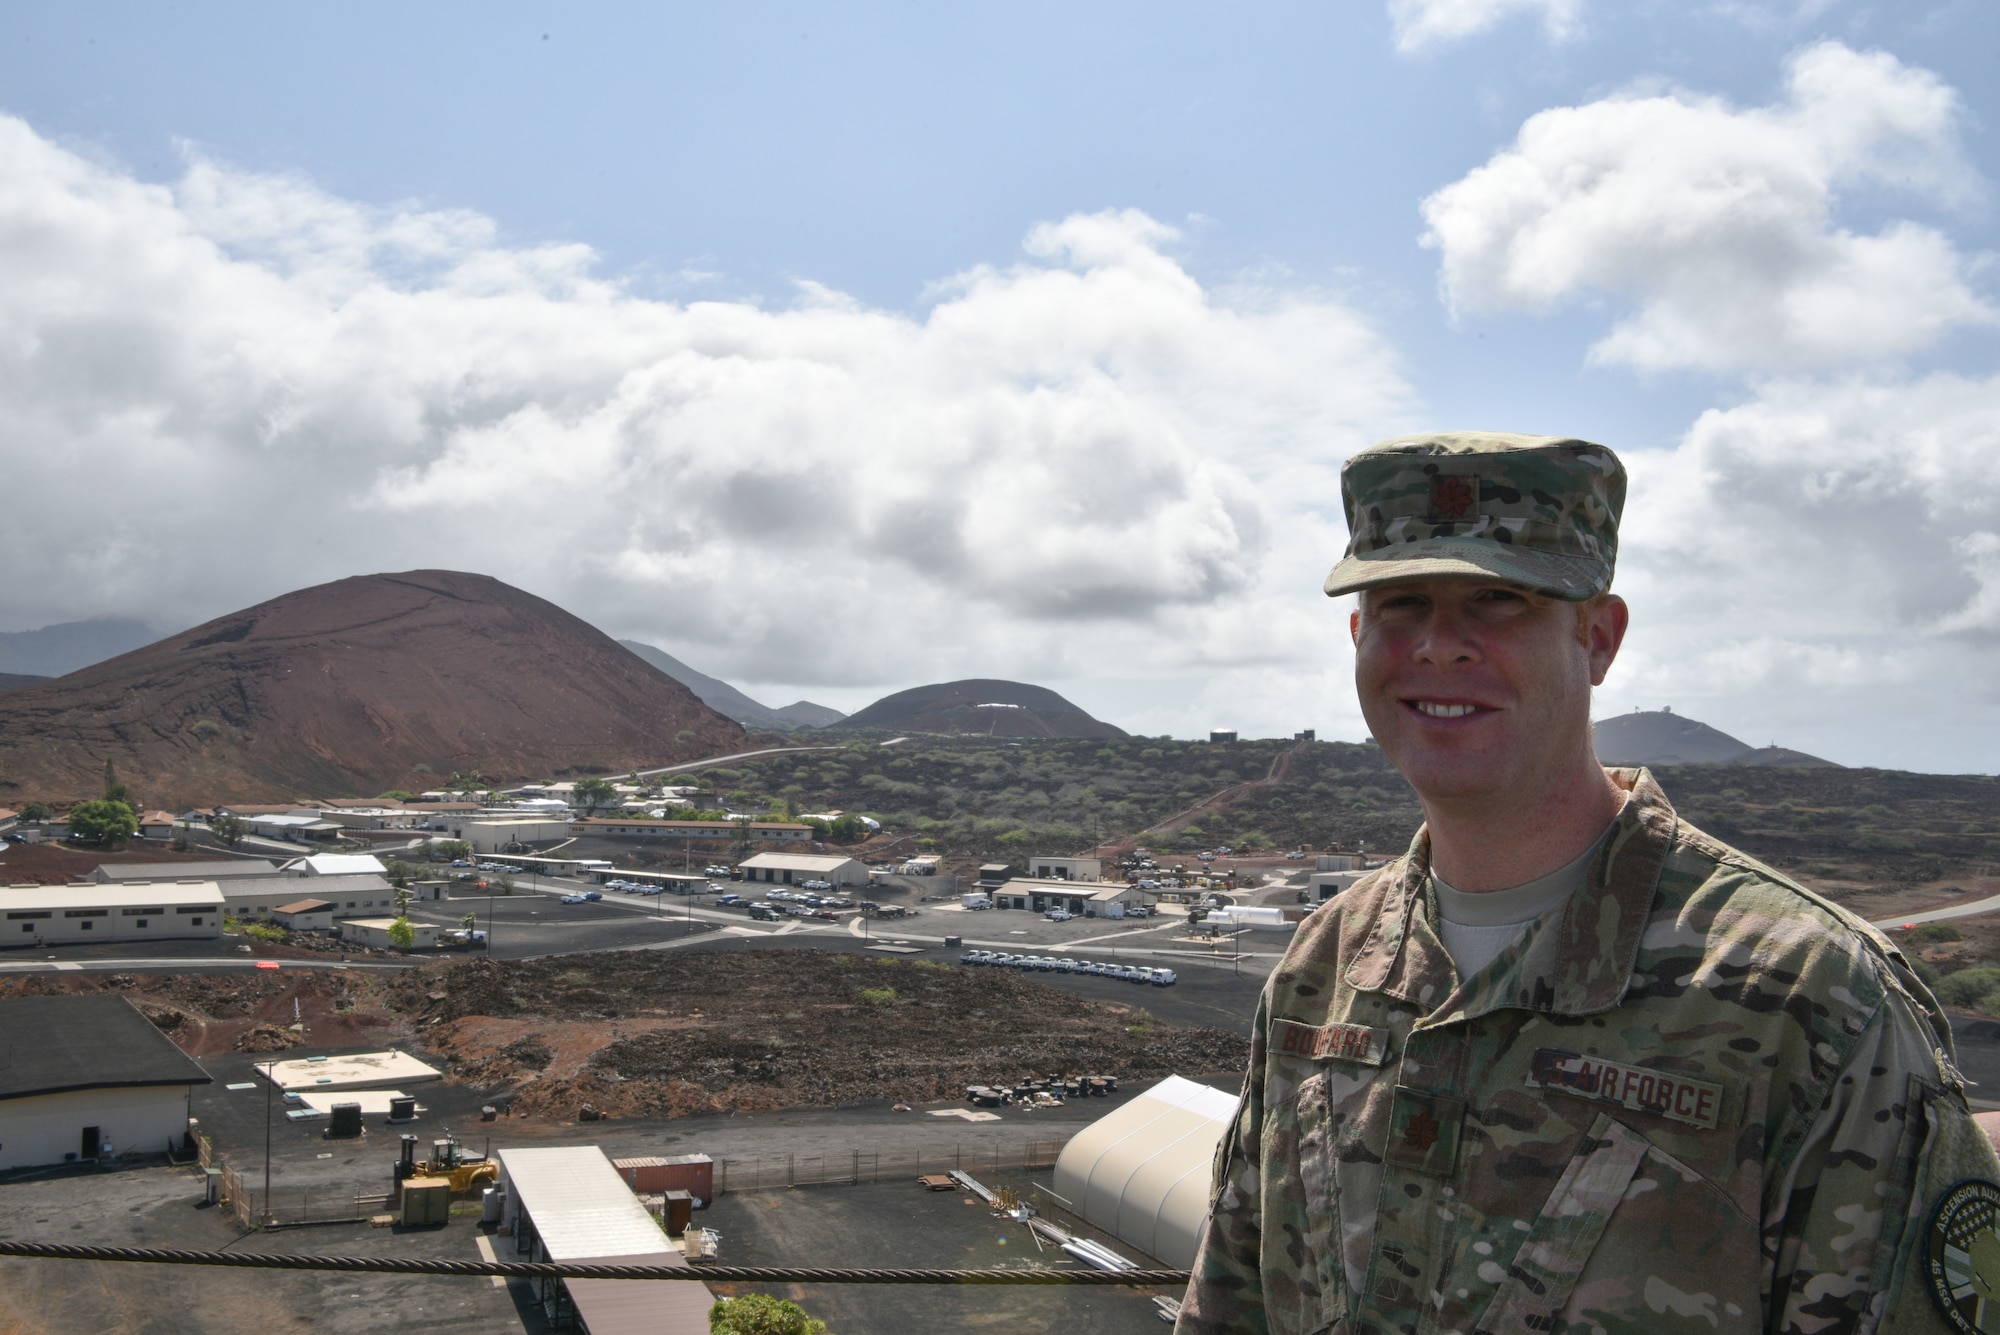 Maj. Robert Bouffard, 45th Mission Support Group, Detachment 2 commander overlooks the base, January 11, 2019 at Ascension Island Auxiliary Airfield. Air Force personnel at Ascension ensure mission success through airfield and launch operations and they also supported the December 23, 2018 launch of the Falcon 9 GPS III launch. (U.S. Air Force photo by Airman 1st Class Dalton Williams)